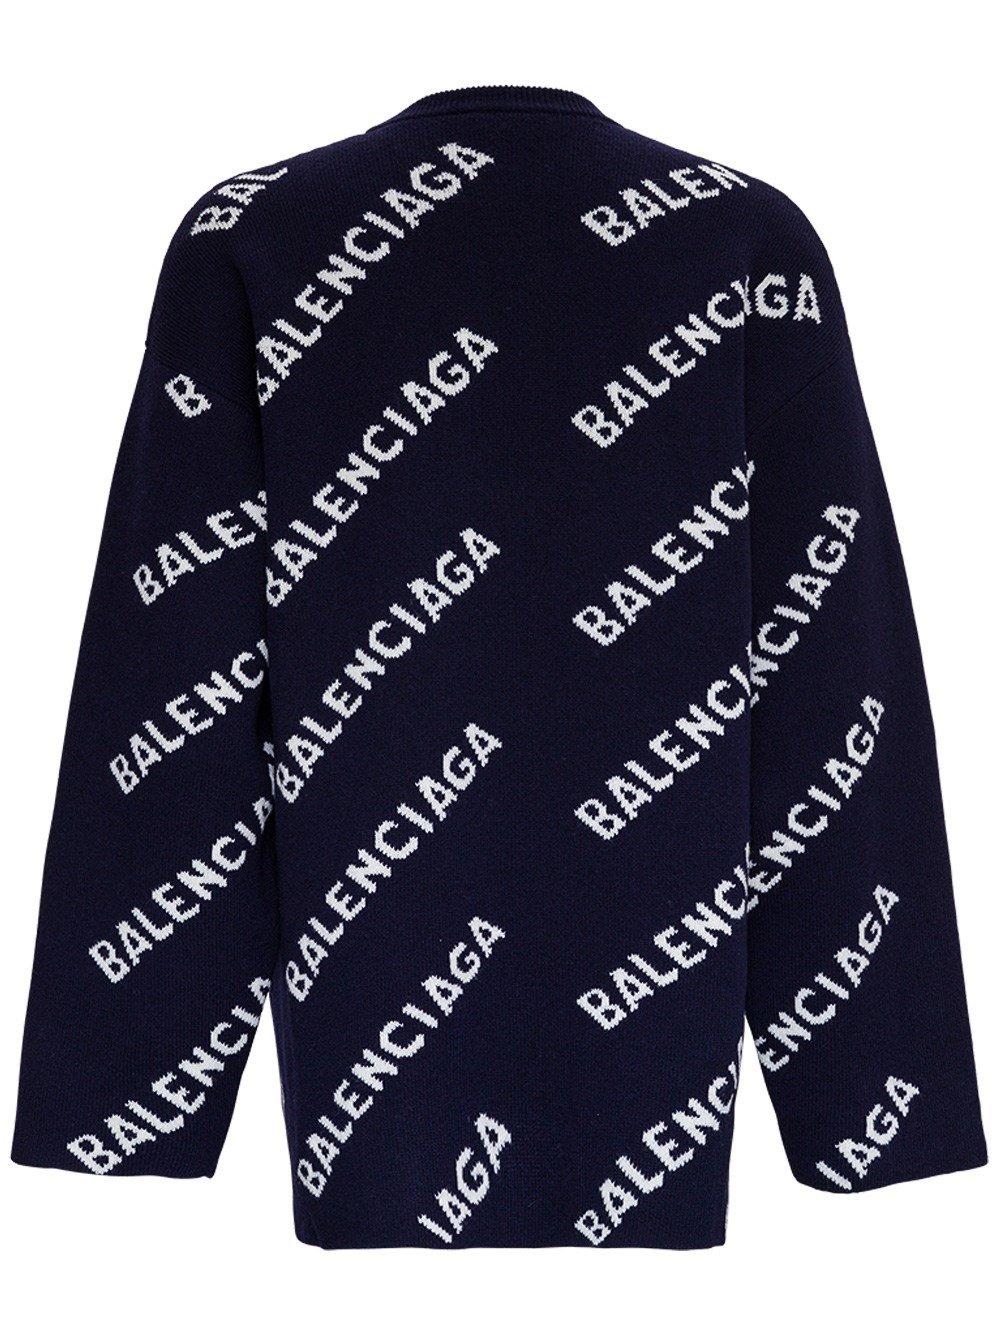 Balenciaga Wool Blend Sweater With Allover Logo in Blue for Men - Lyst